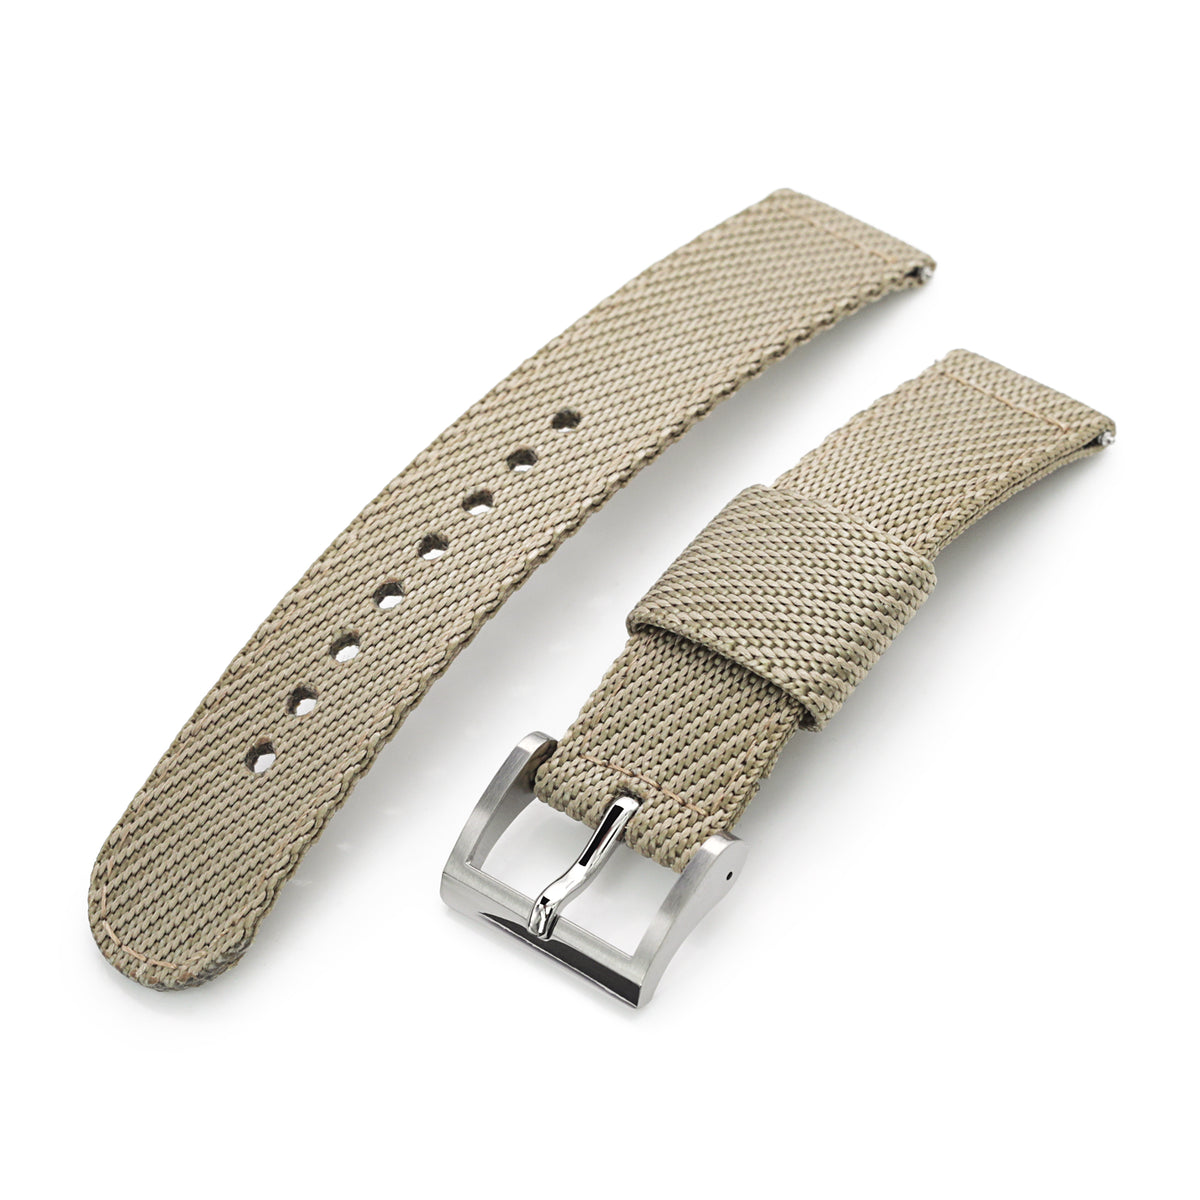 2-pcs Nylon Watch Band, Khaki, Quick Release, Polished Buckle Strapcode Watch Bands